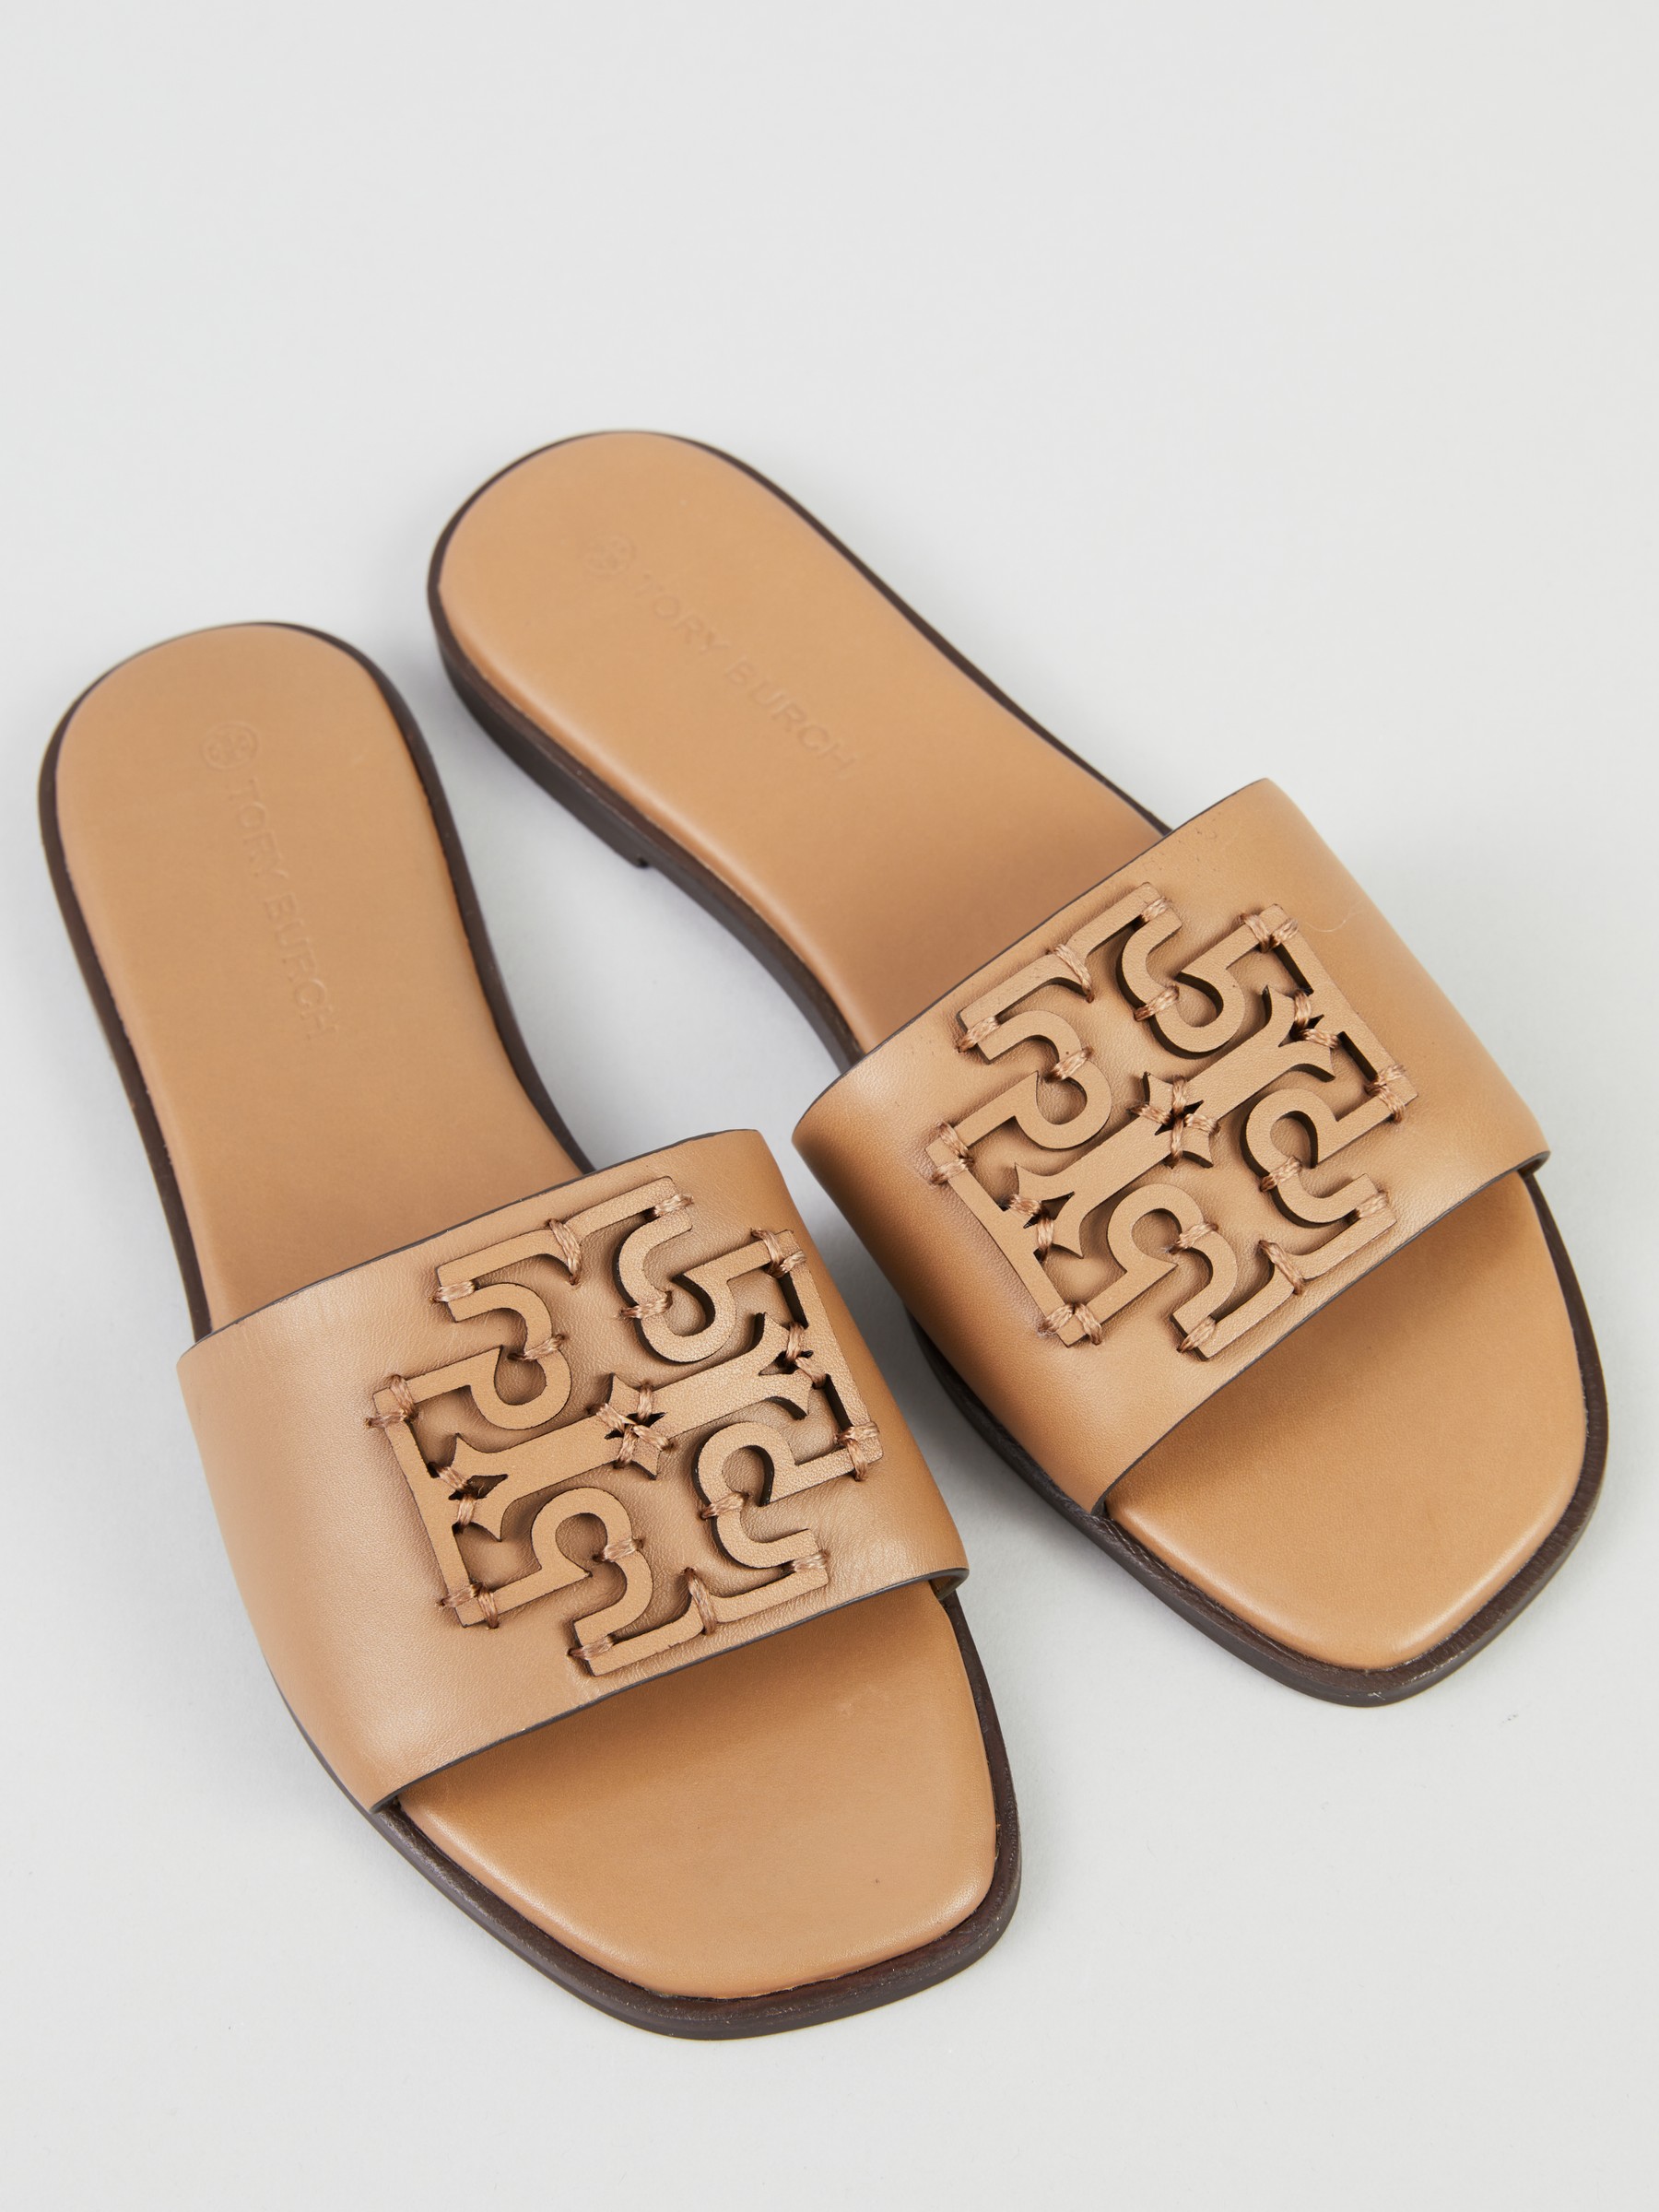 Tory Burch Sandals 'Ines' Brown | Heeled Sandals